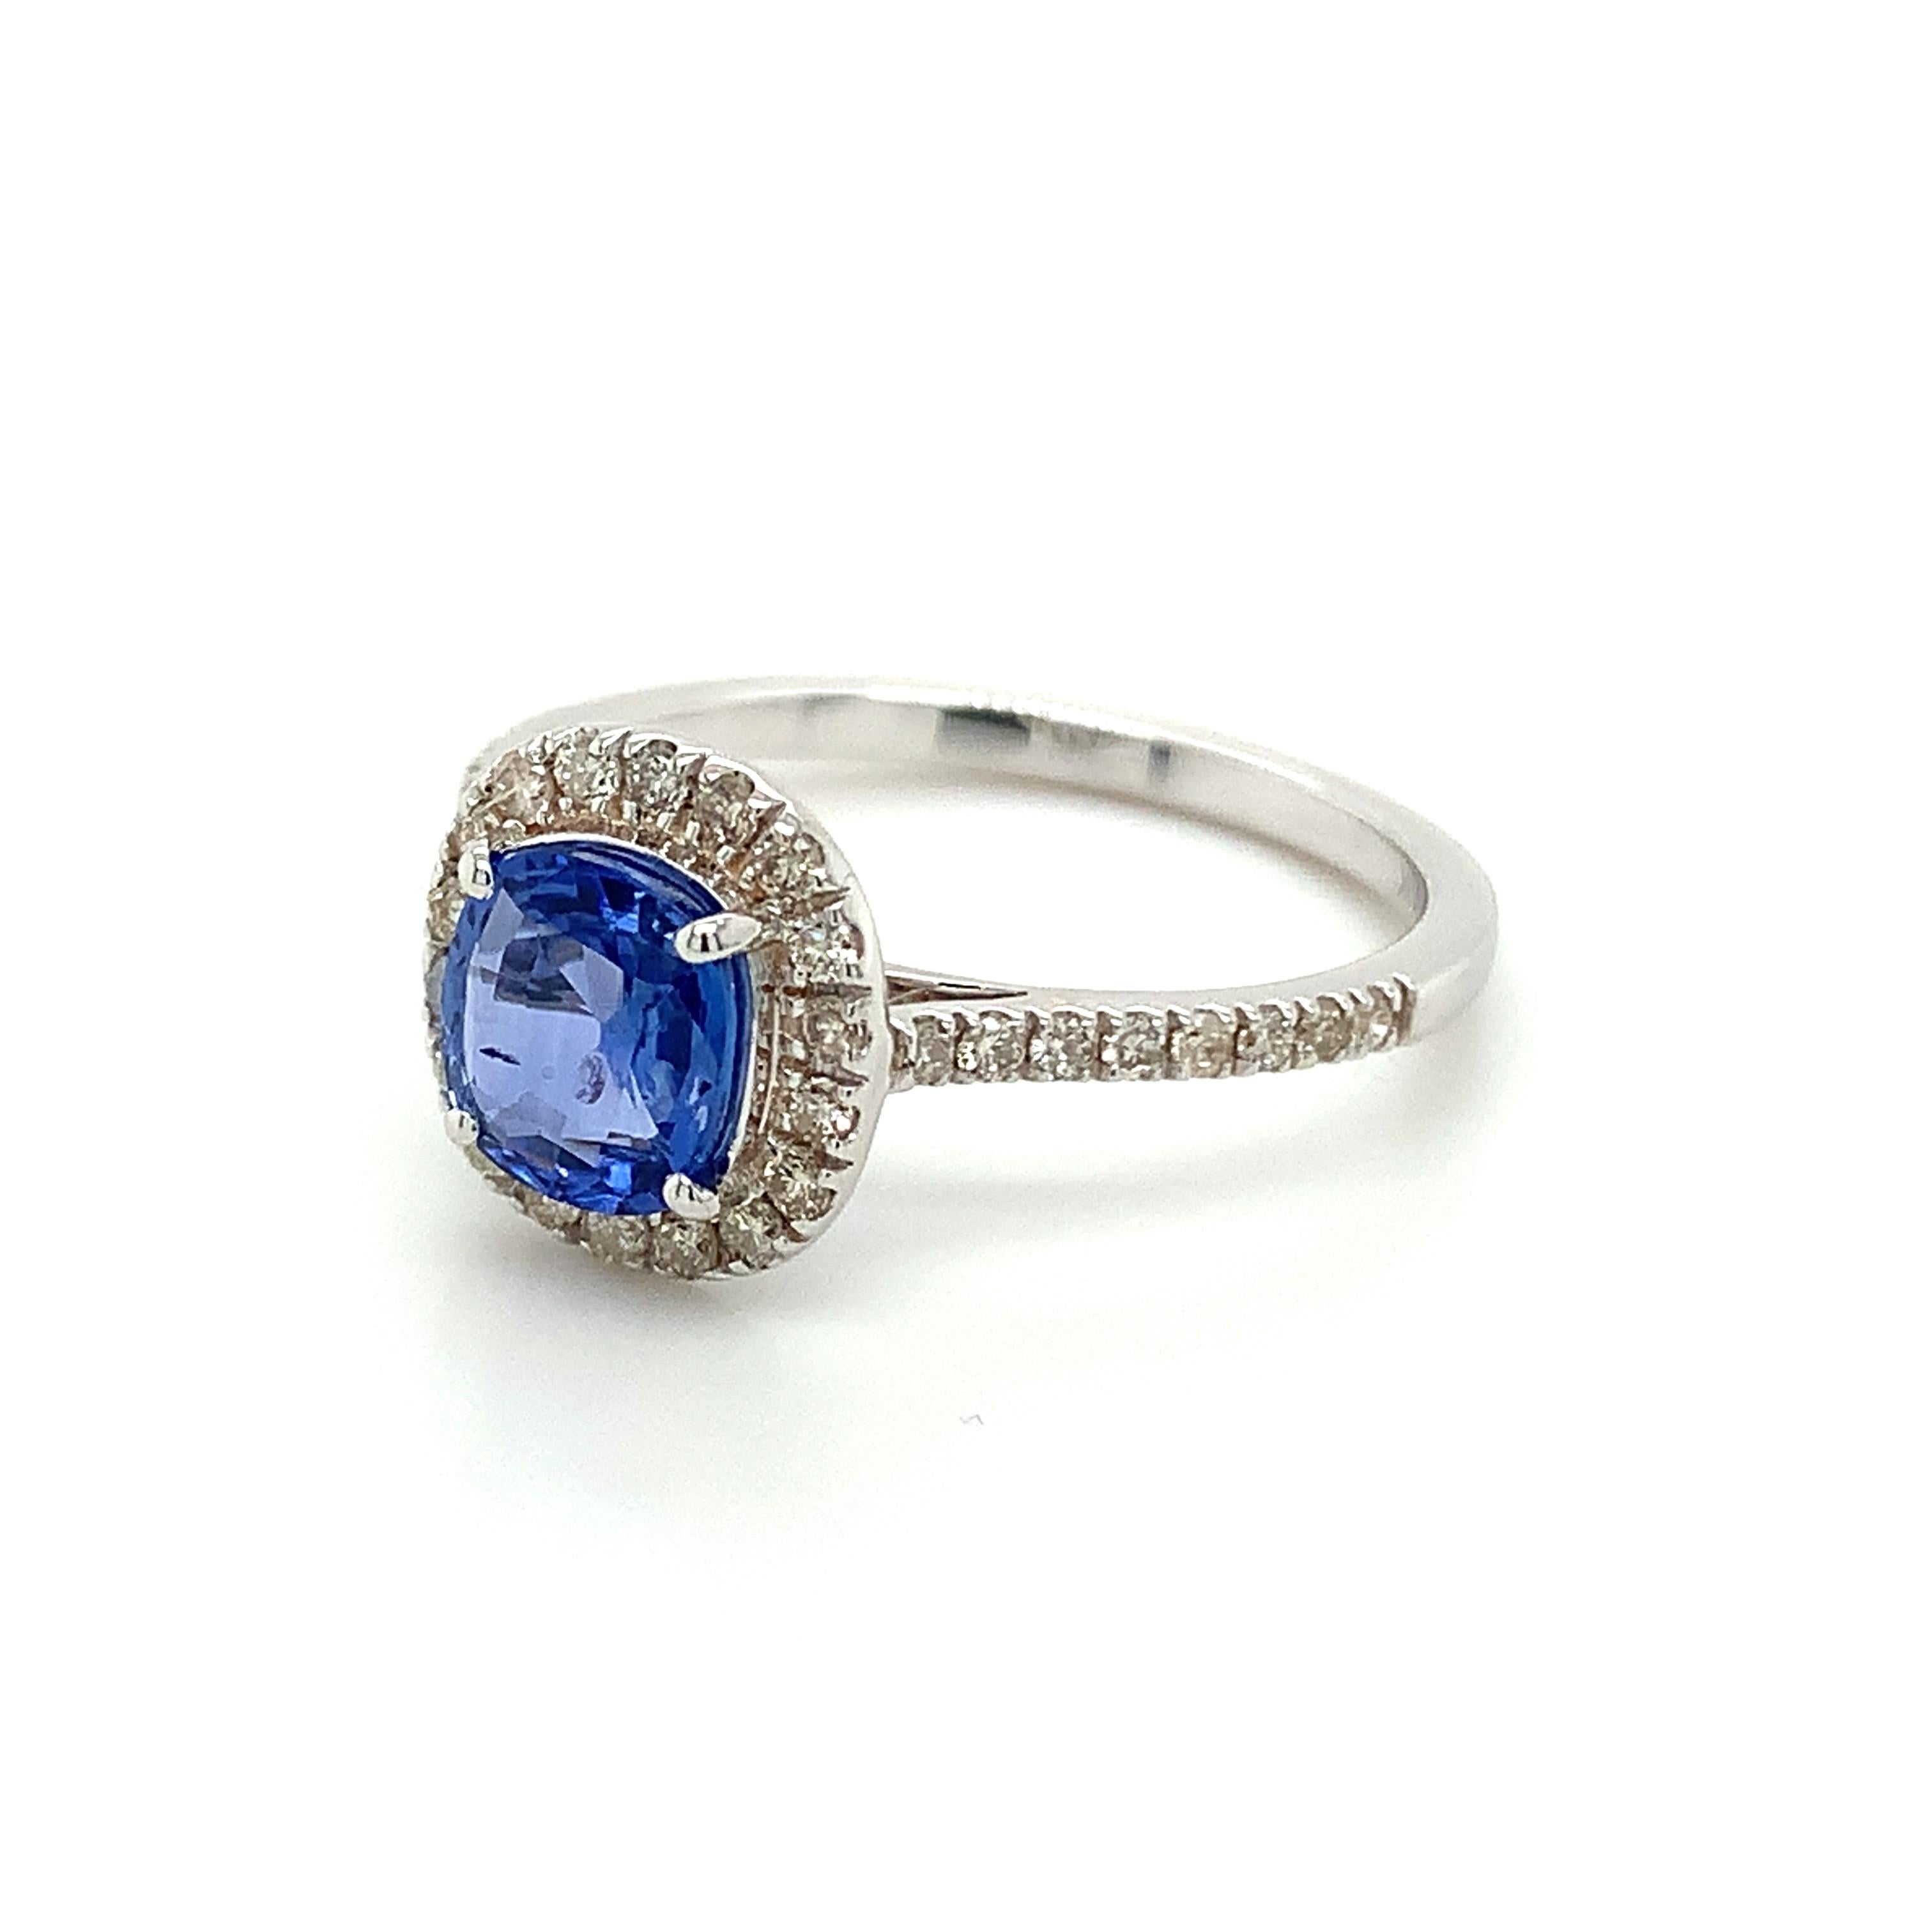 Cushion cut blue sapphire gemstone beautifully crafted in a 10K white gold ring with natural diamonds.

A highly precious September birthstone with a delighting blue color. They are believed to bring good luck & fortune in life. Explore a vast range